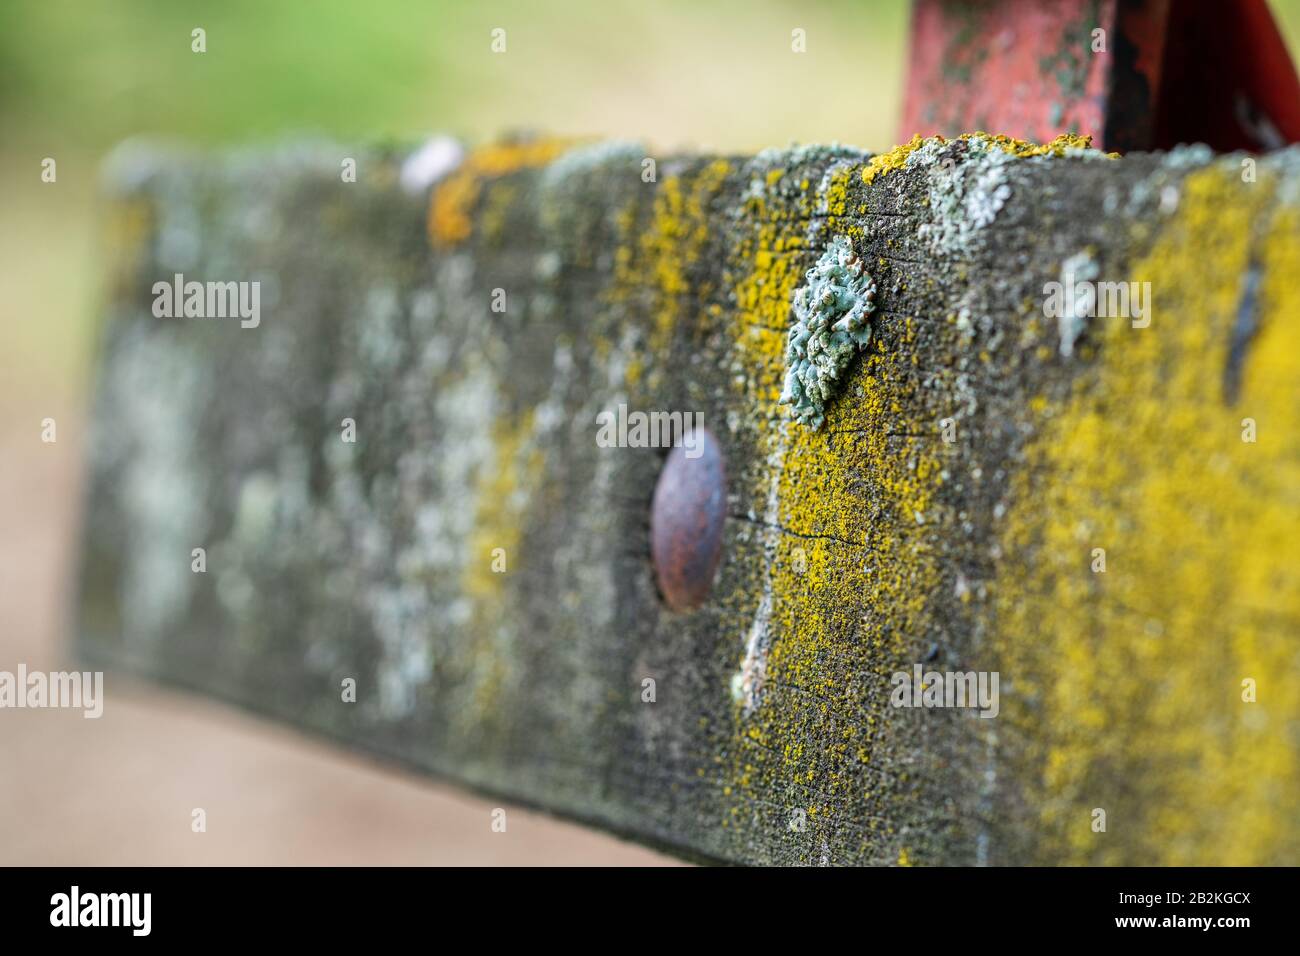 Foliose lichen, a complex organism that arises from a symbiotic relationship between fungi and a photosynthetic partner, on an old wooden bench. Macro Stock Photo